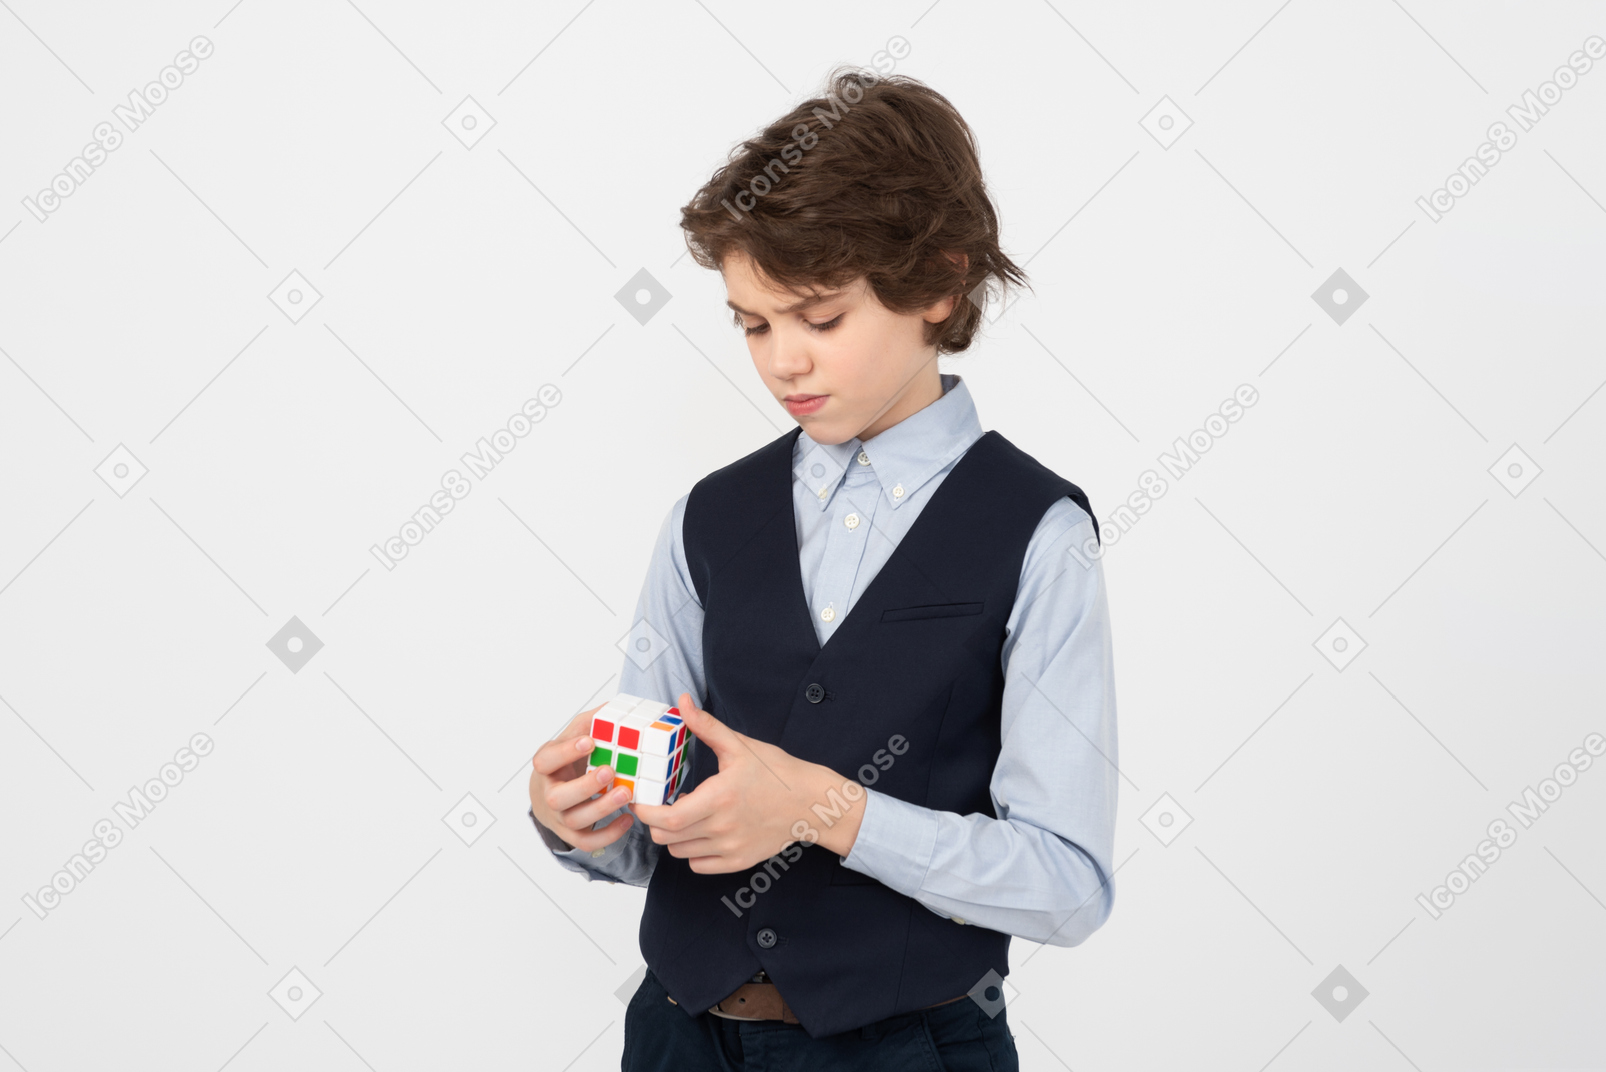 Cubing competition